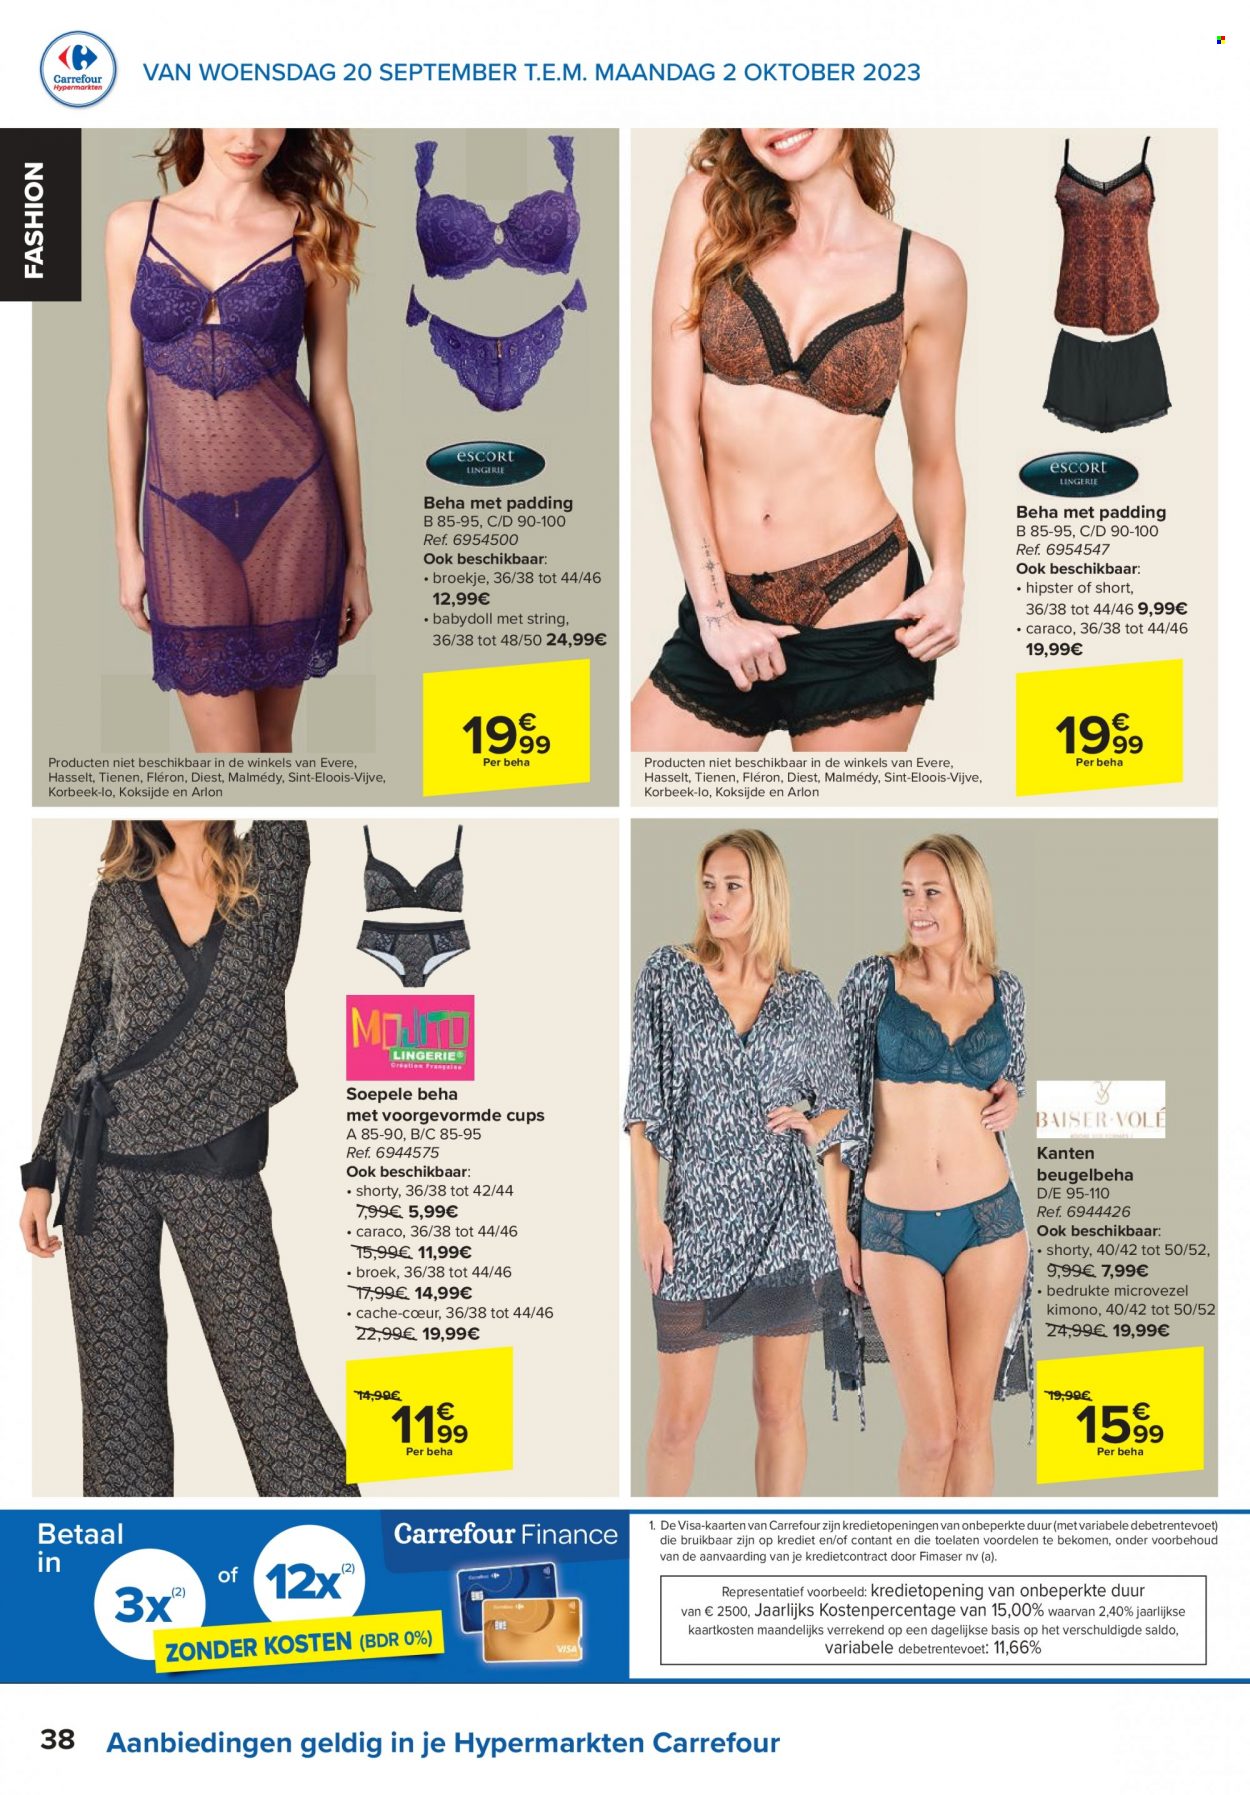 Catalogue Carrefour hypermarkt - 20.9.2023 - 2.10.2023. Page 38.